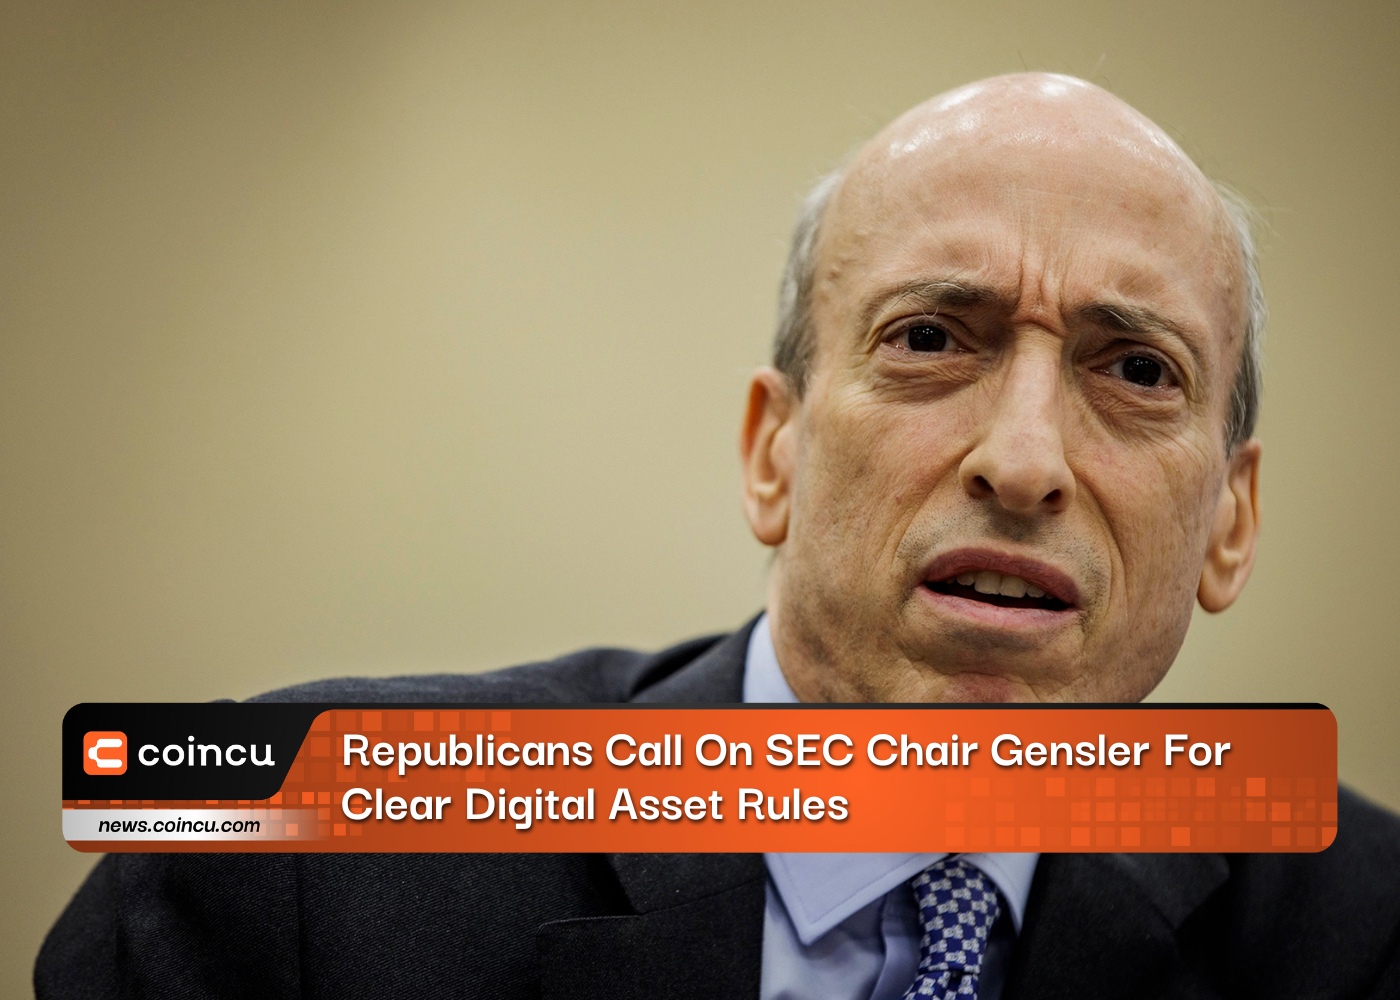 Republicans Call On SEC Chair Gensler For Clear Digital Asset Rules